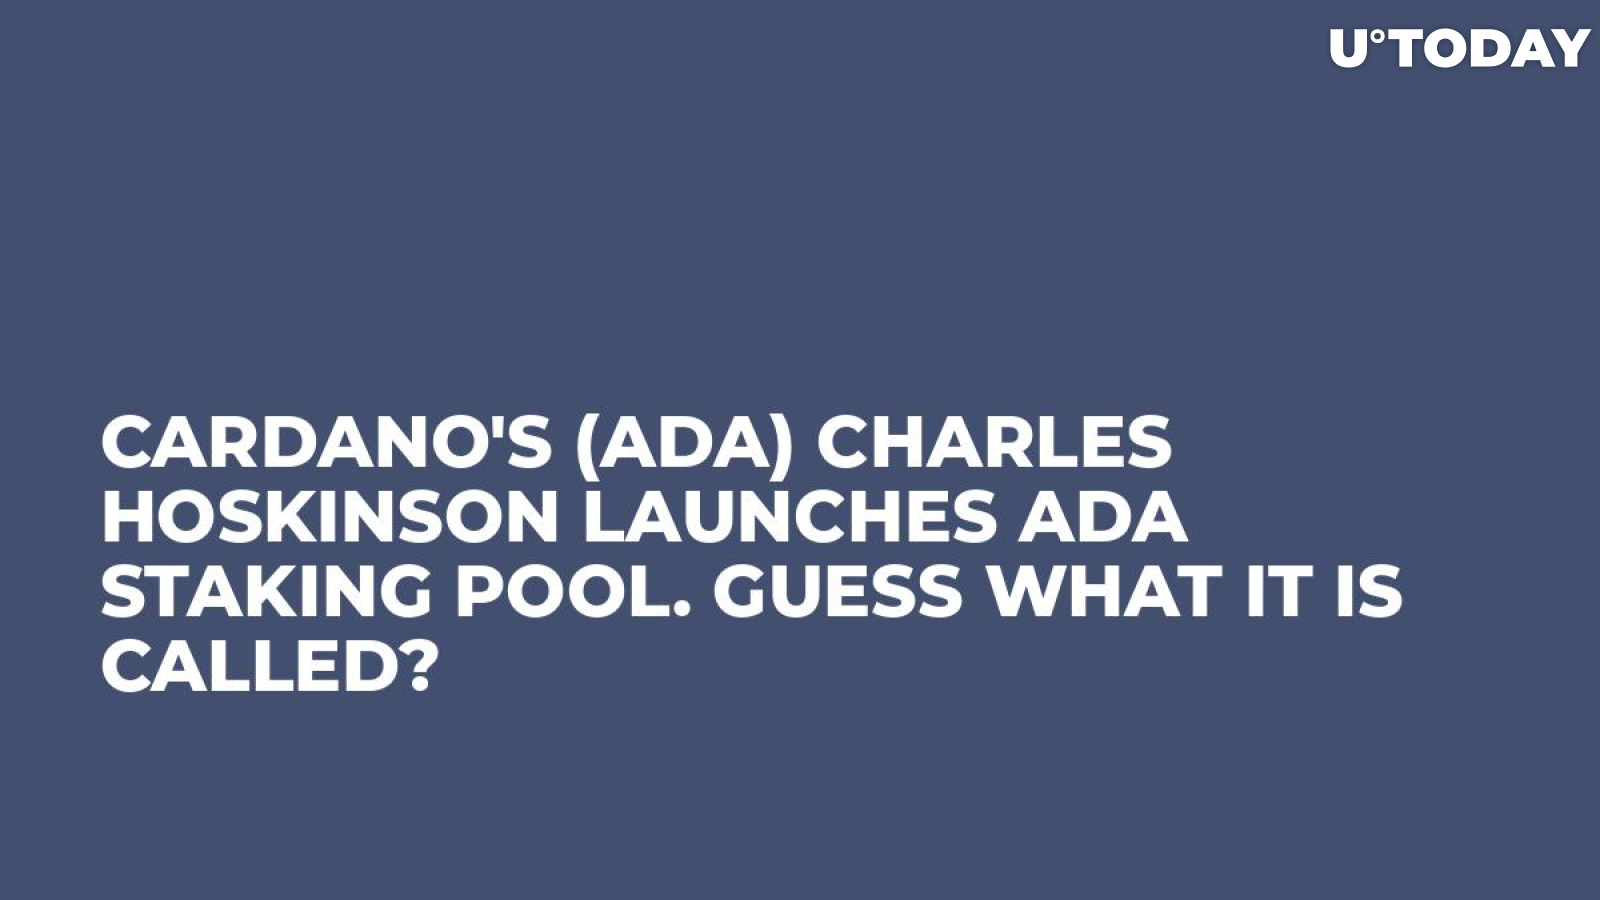 Cardano's (ADA) Charles Hoskinson Launches ADA Staking Pool. Guess What It Is Called?